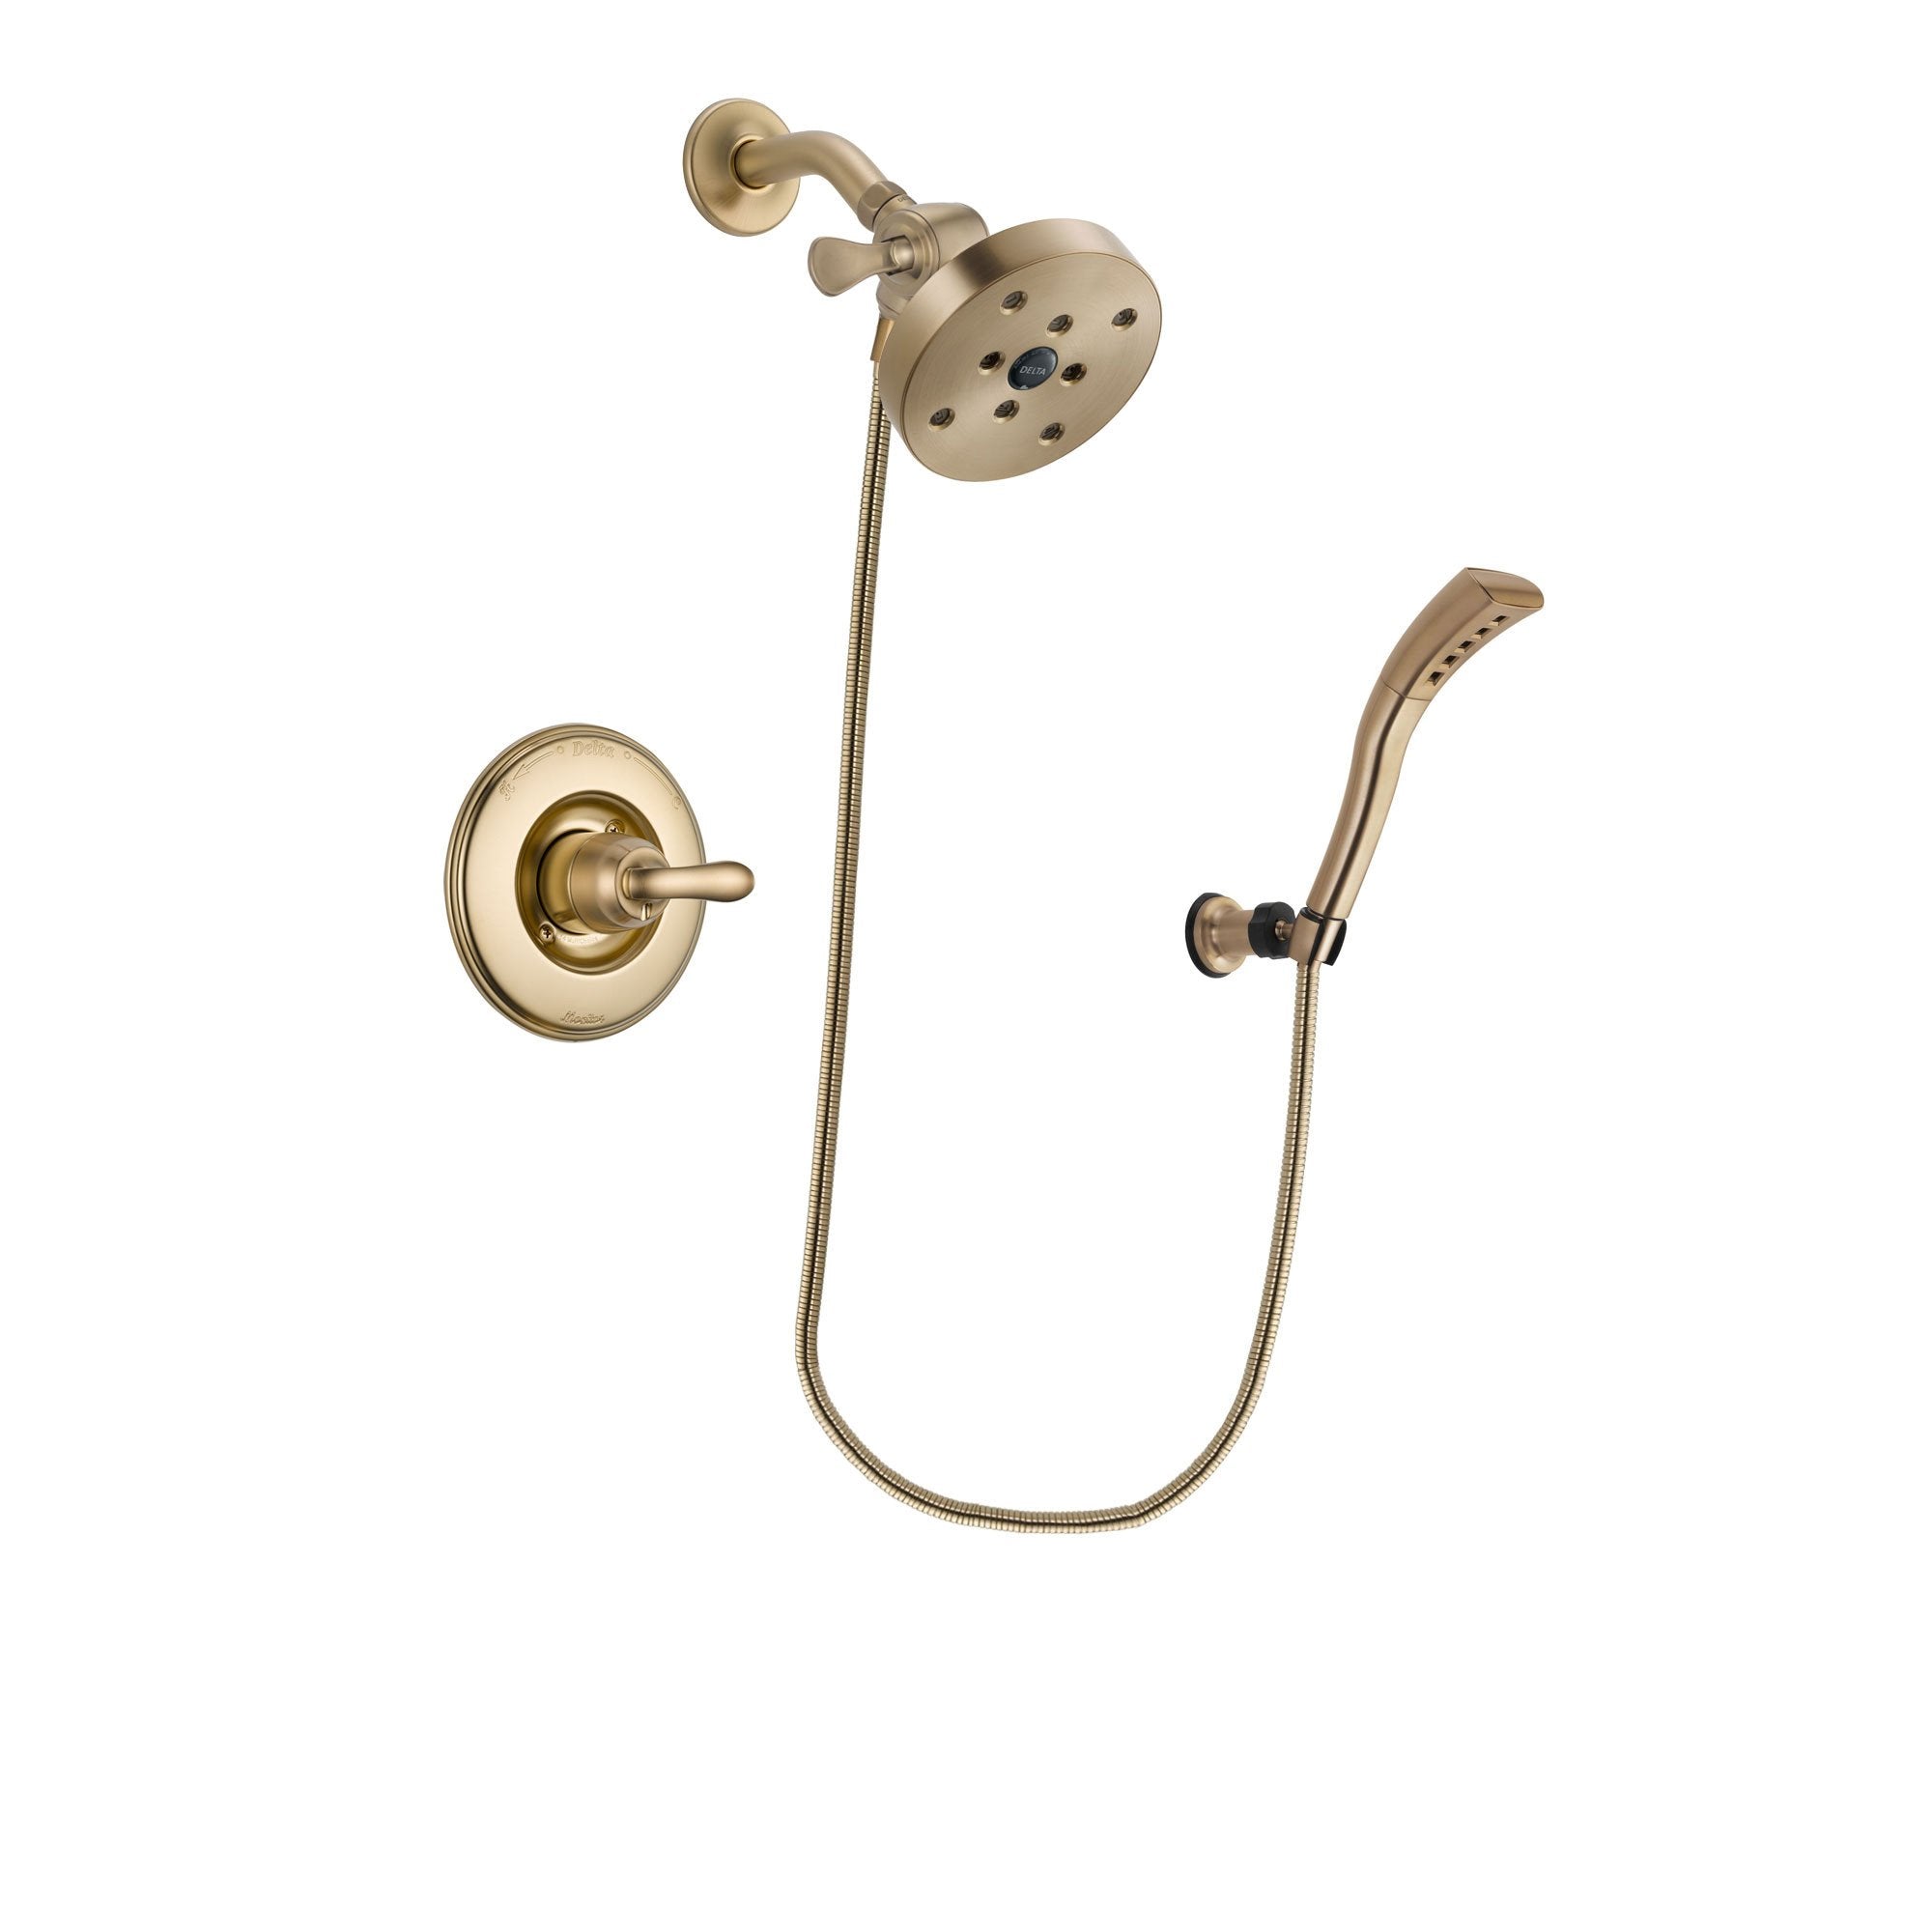 Delta Linden Champagne Bronze Finish Shower Faucet System Package with 5-1/2 inch Showerhead and Modern Wall Mount Personal Handheld Shower Spray Includes Rough-in Valve DSP3722V